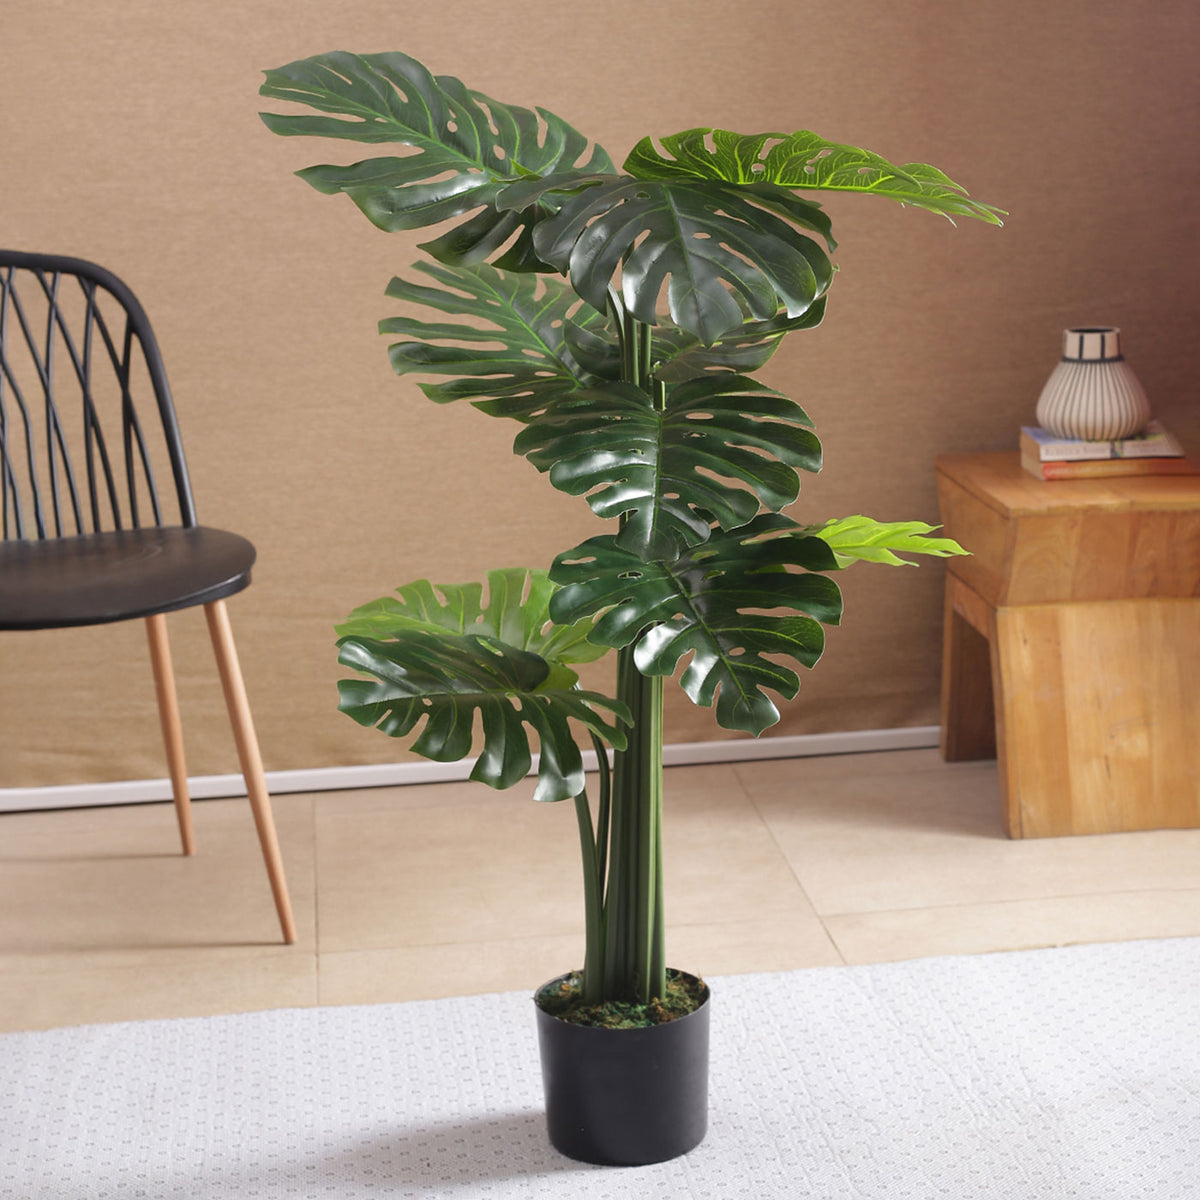 Beautiful Artificial PVC Silk Monstera Plant with Big Leaves and for Home and Office Décor (With Pot, 180 cm Tall)